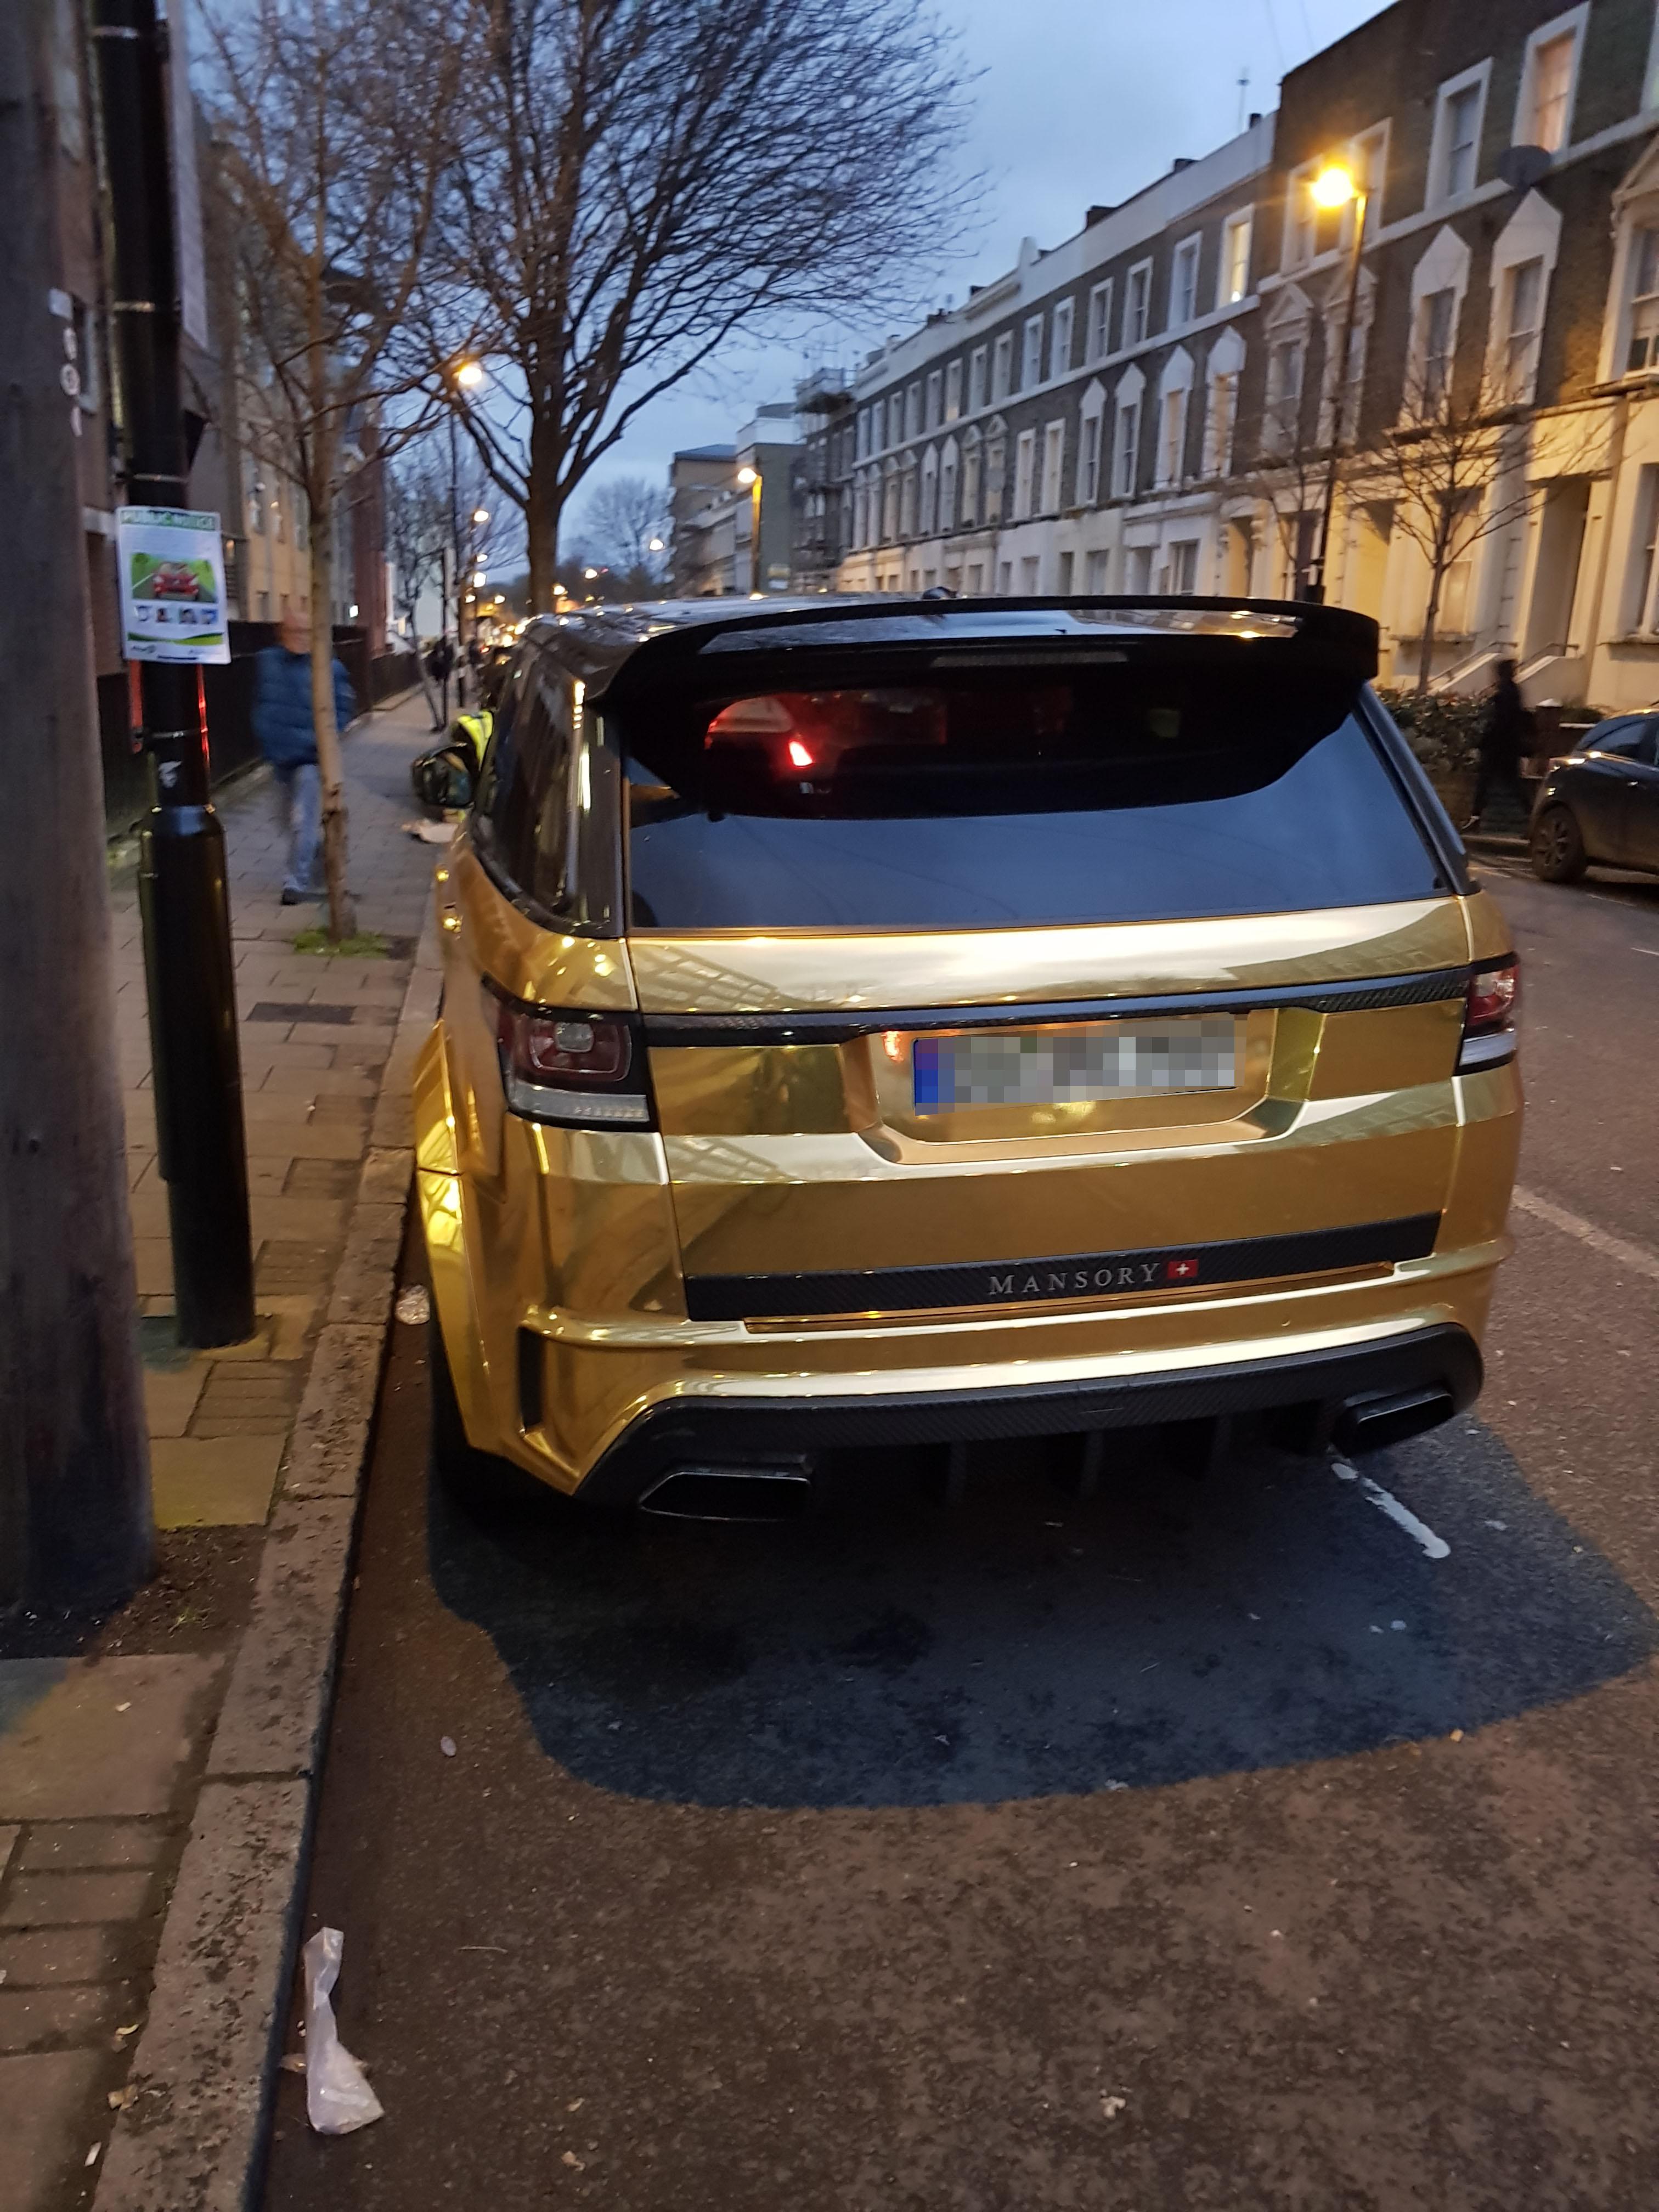  An Arsenal fan recognised the flashy vehicle parked close to the stadium